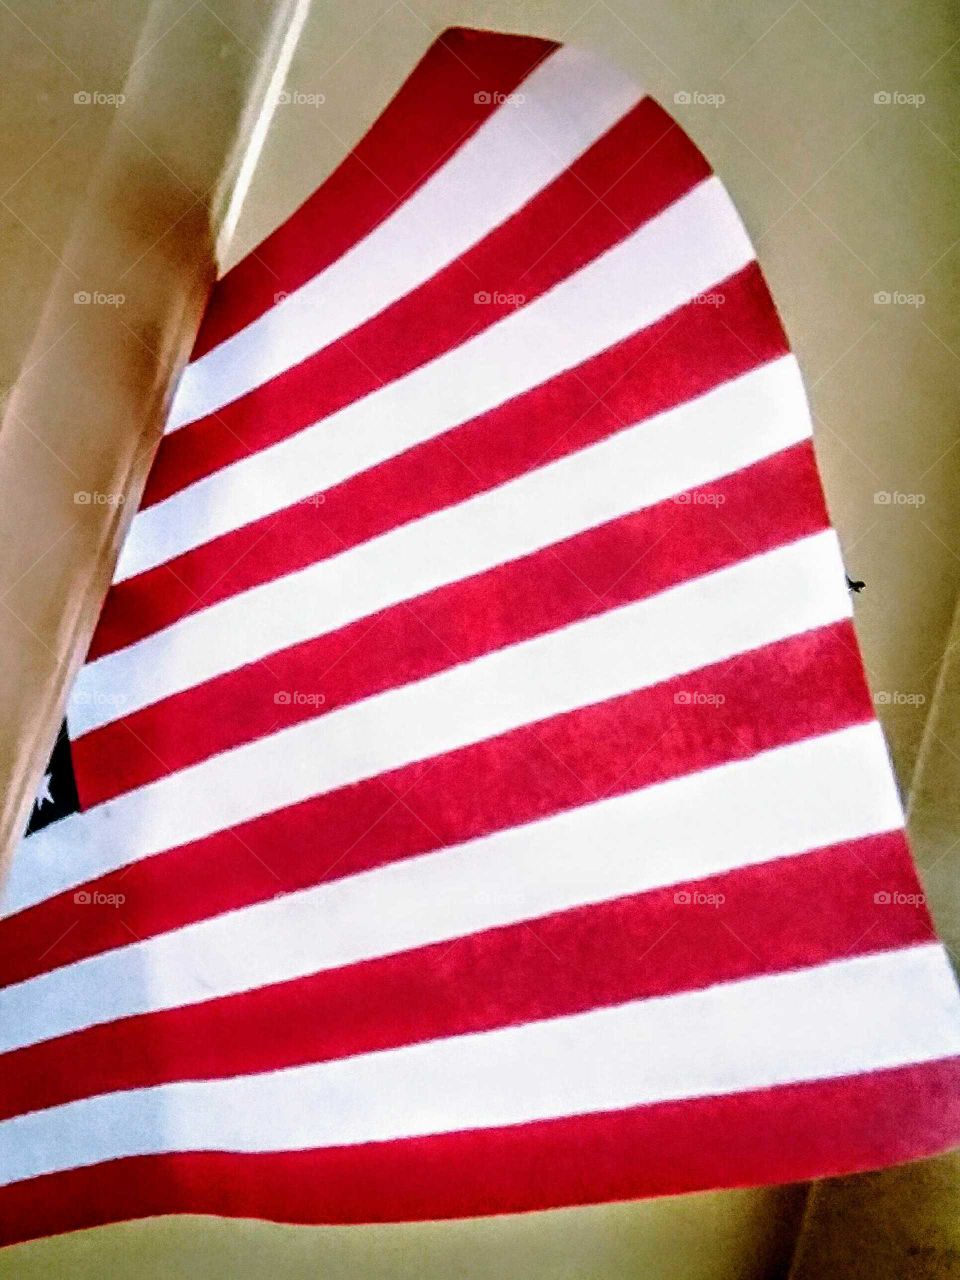 Red and White Stripes of American Flag